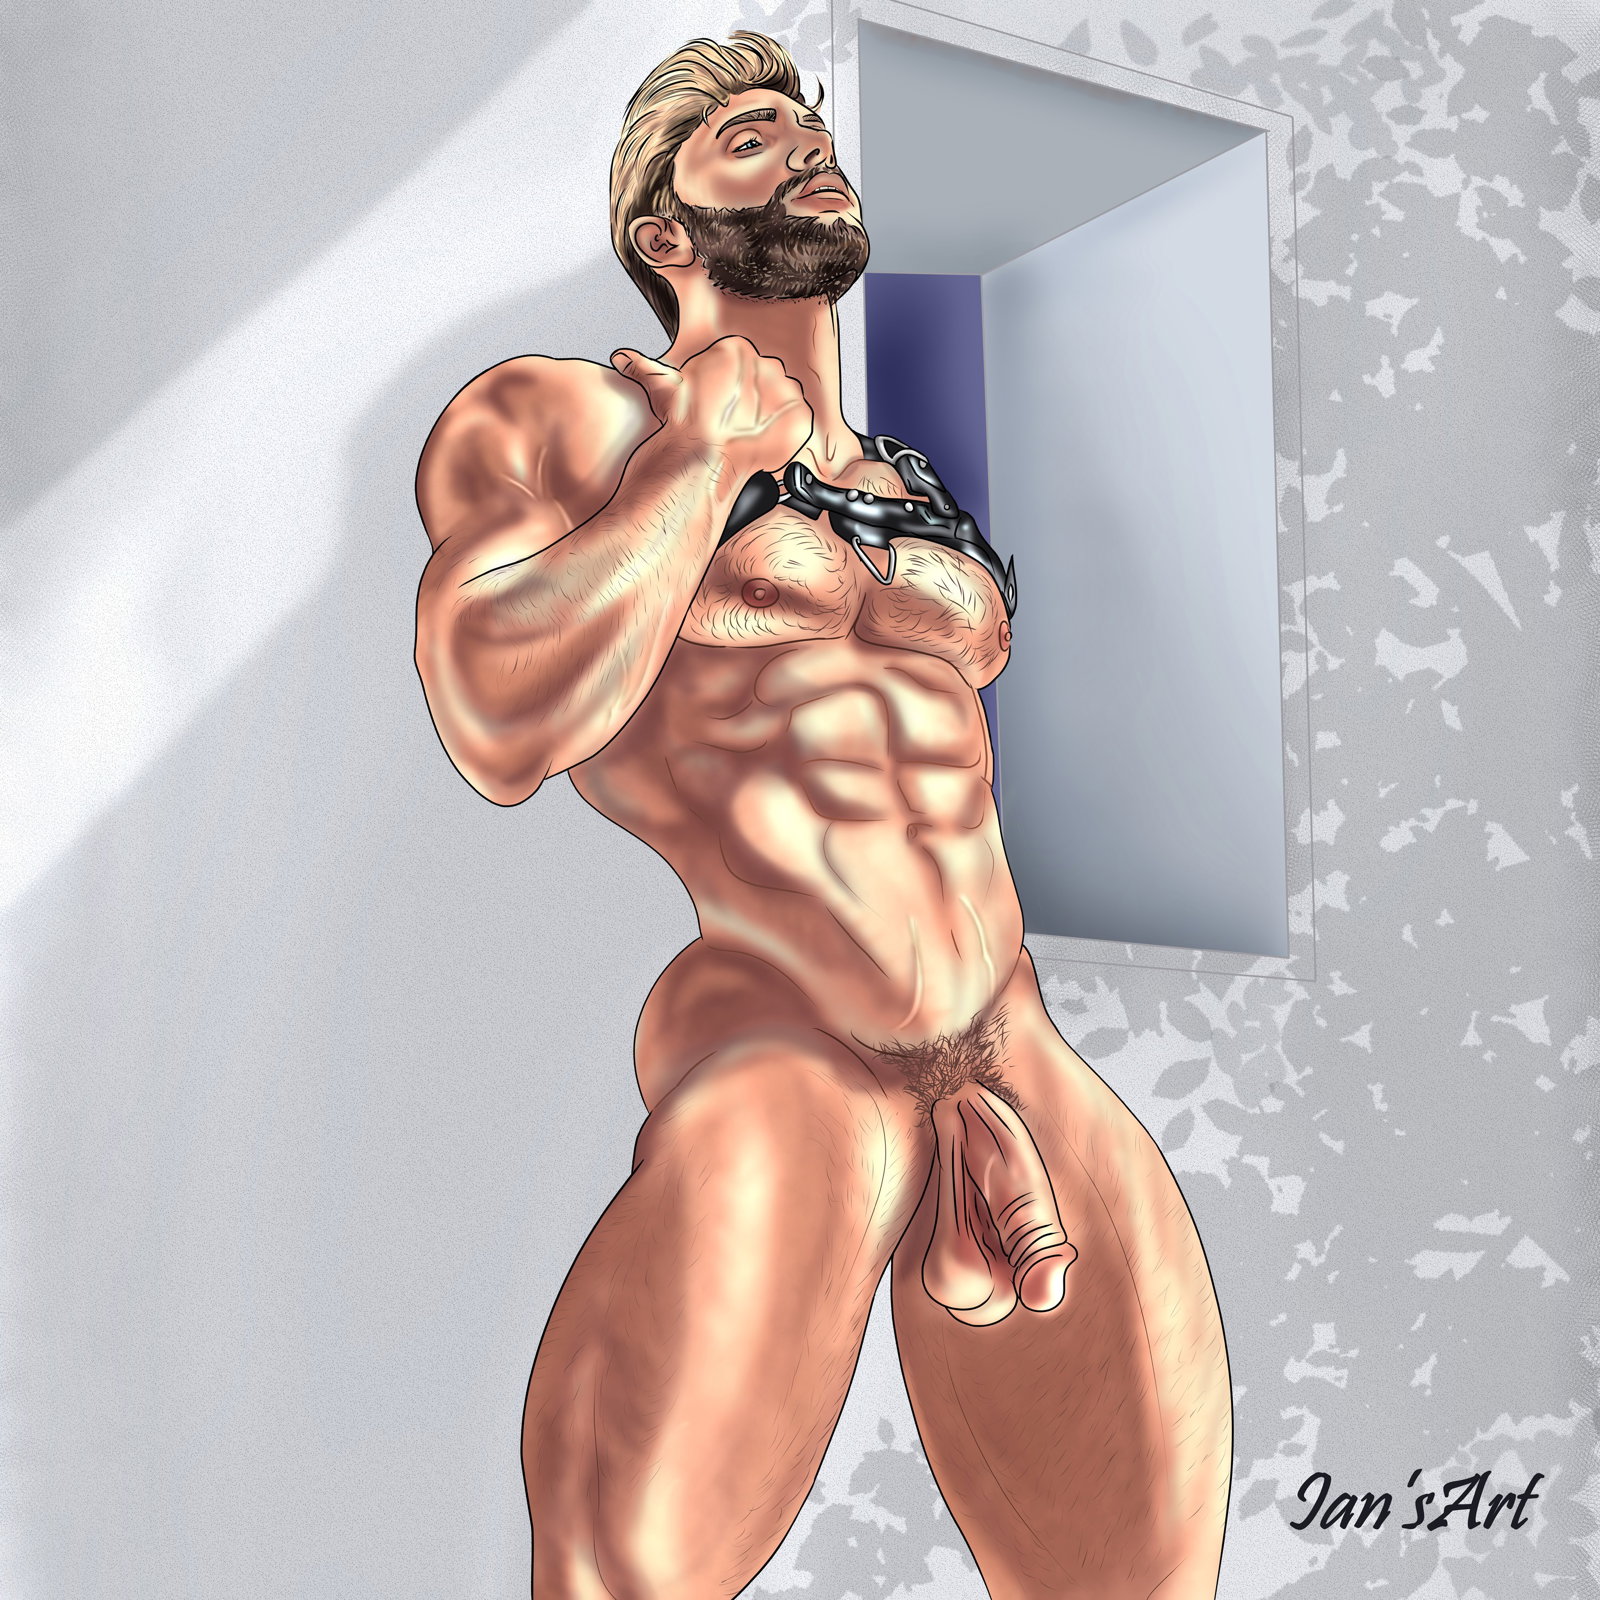 Watch the Photo by Iansmaleart with the username @iansmaleart1, posted on October 30, 2019. The post is about the topic Gay. and the text says 'Some of my drawings 😉😊'